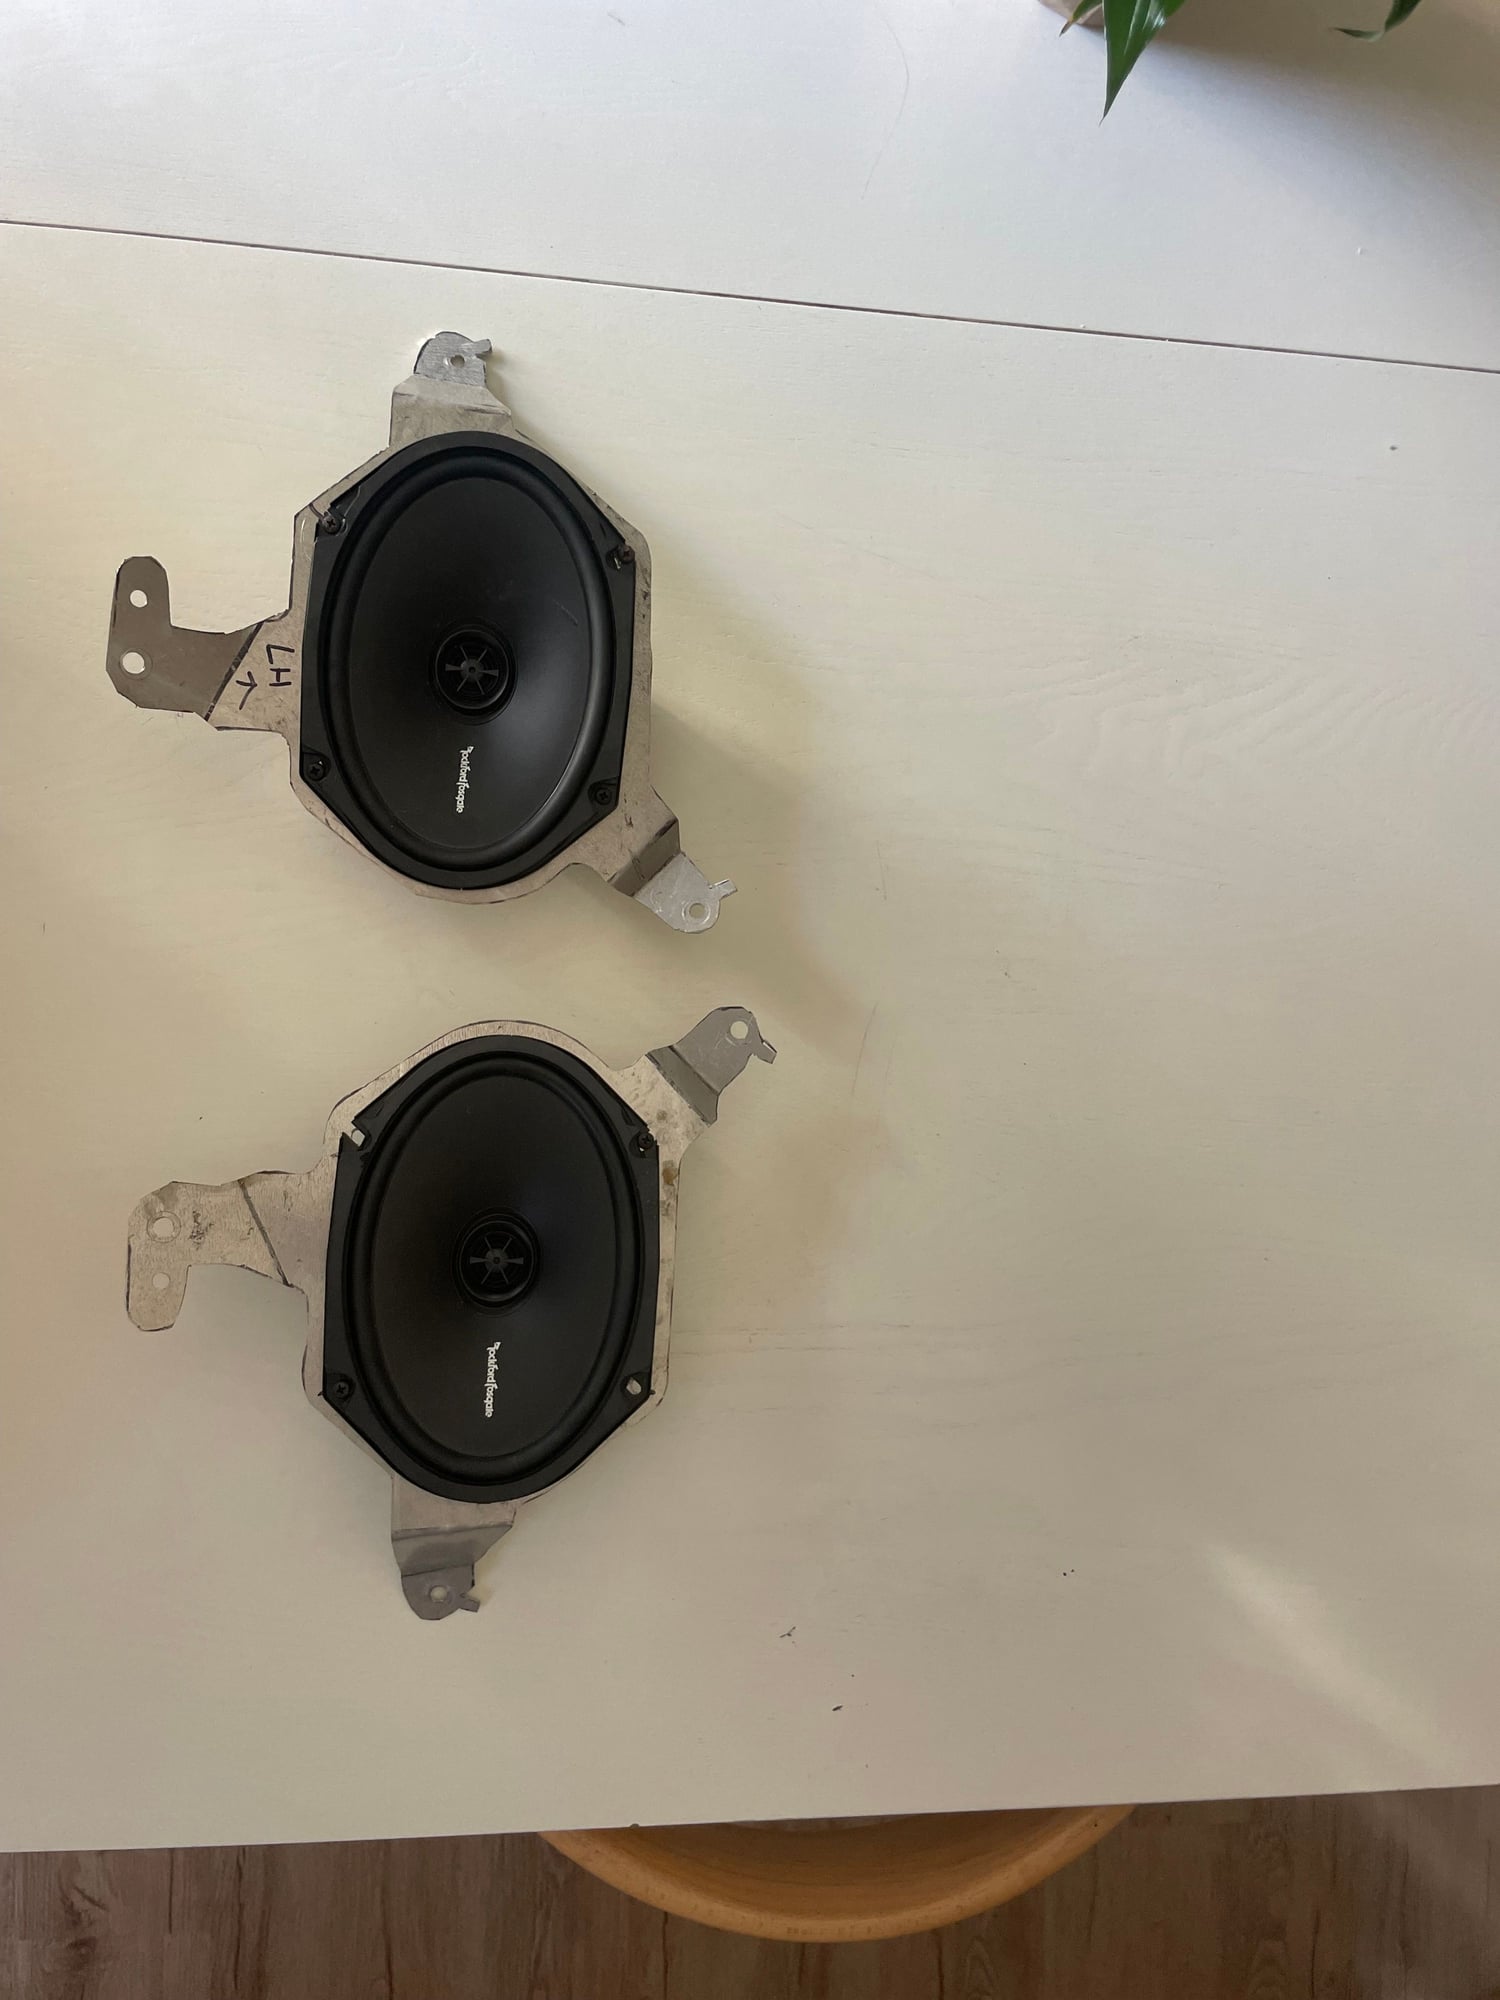 Audio Video/Electronics - FD speakers and brackets - Used - 1993 to 2002 Mazda RX-7 - Torrance, CA 90501, United States